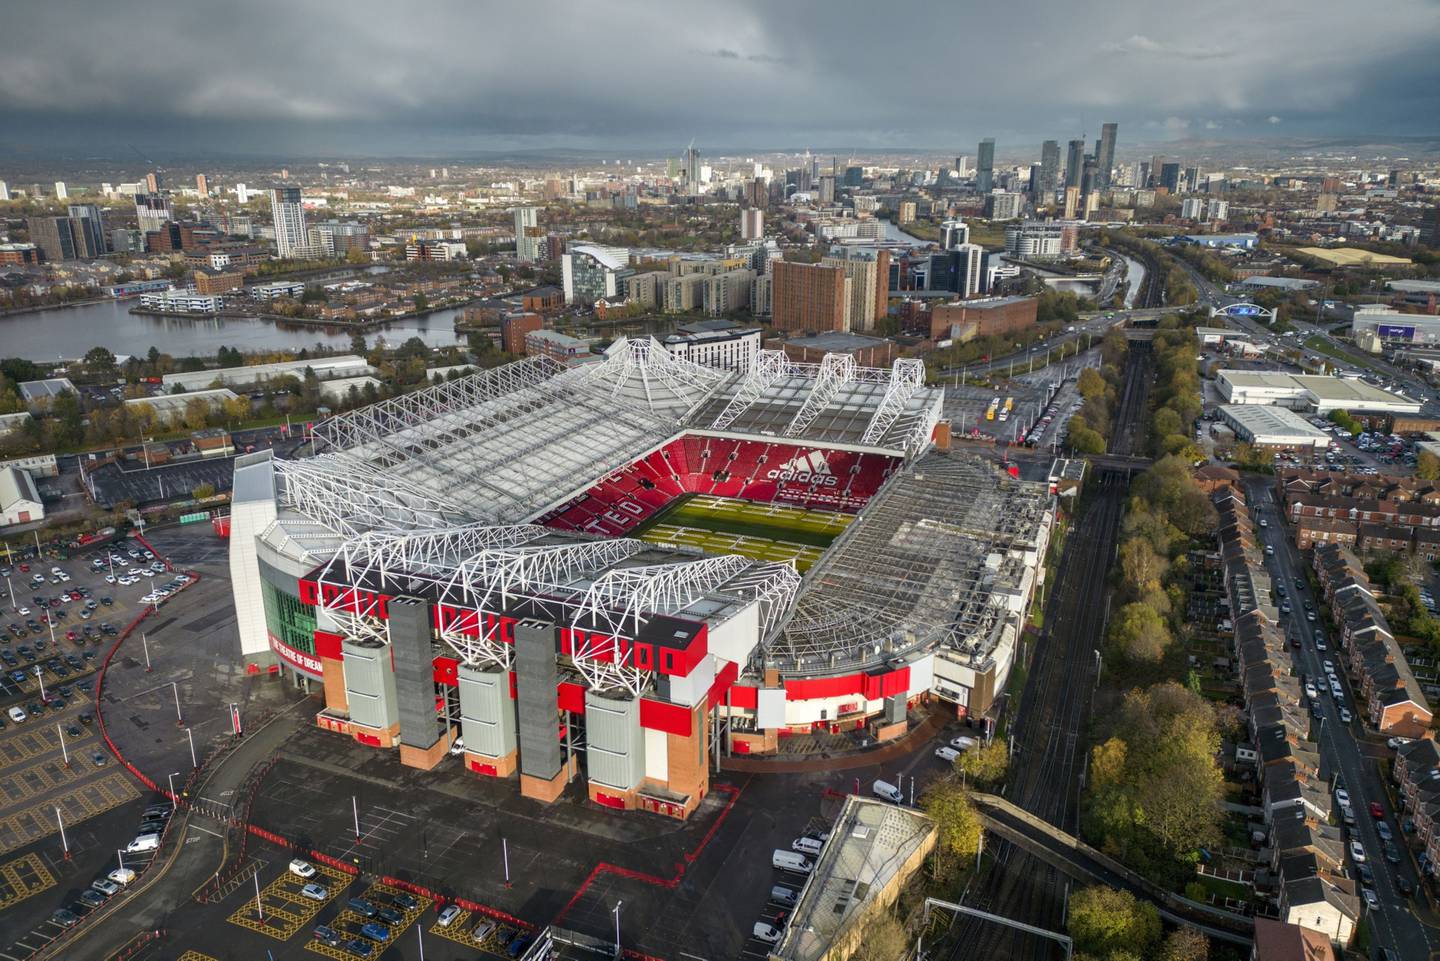 Aerial view of Old Trafford Stadium, the home of Manchester United FC.